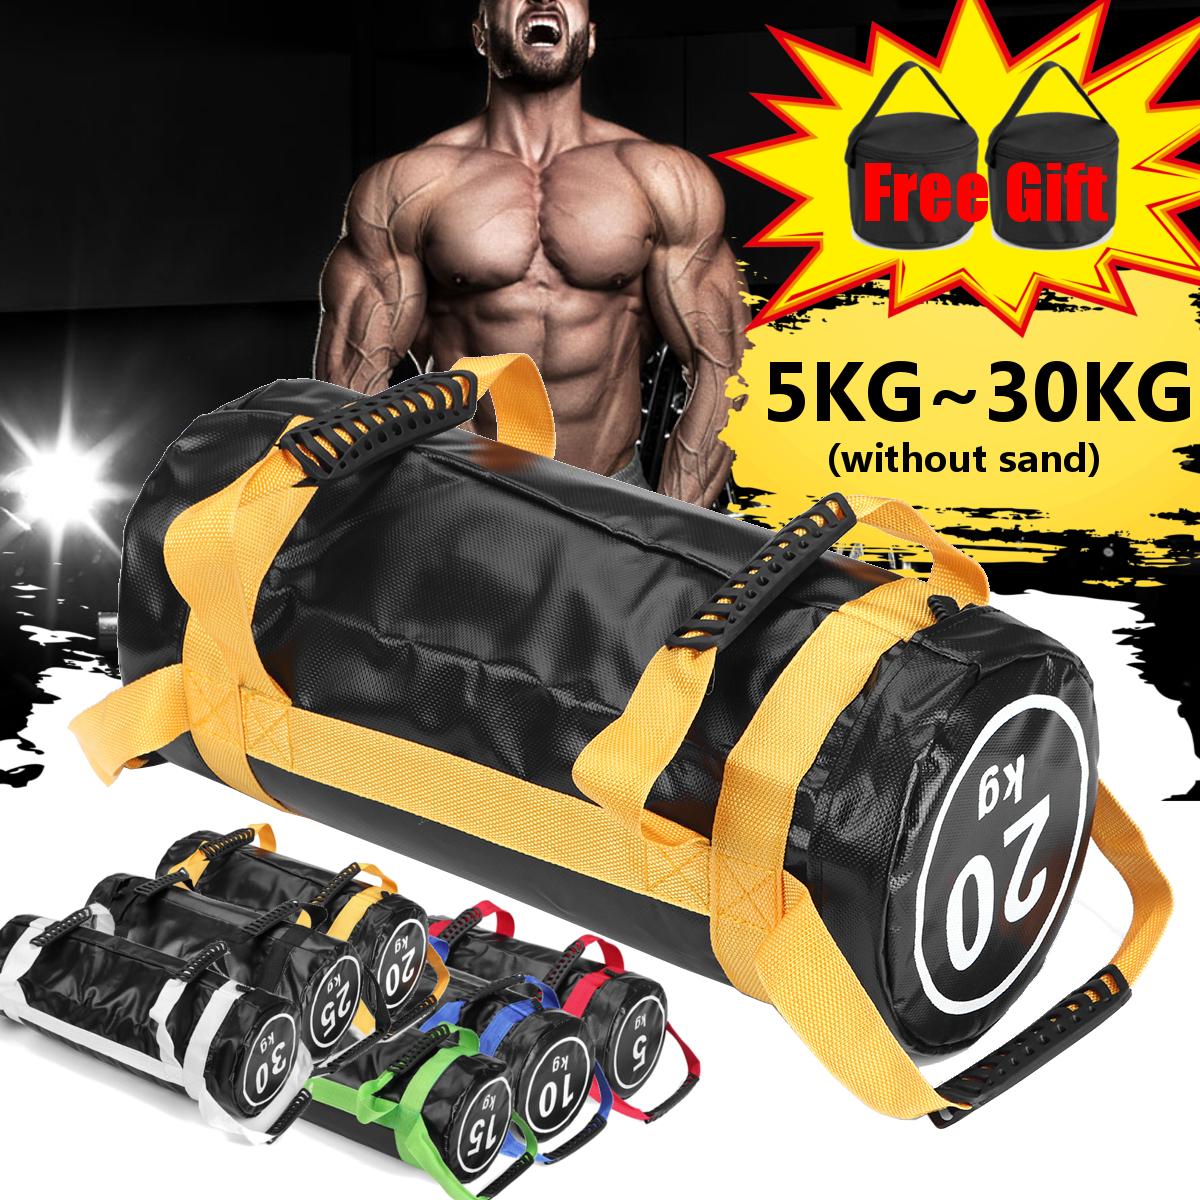 515202530-kg-Filled-Weight-Sand-Power-Bag-Strength-Training-Body-Building-Fitness-Boxing-Exercise-Sa-1697385-1